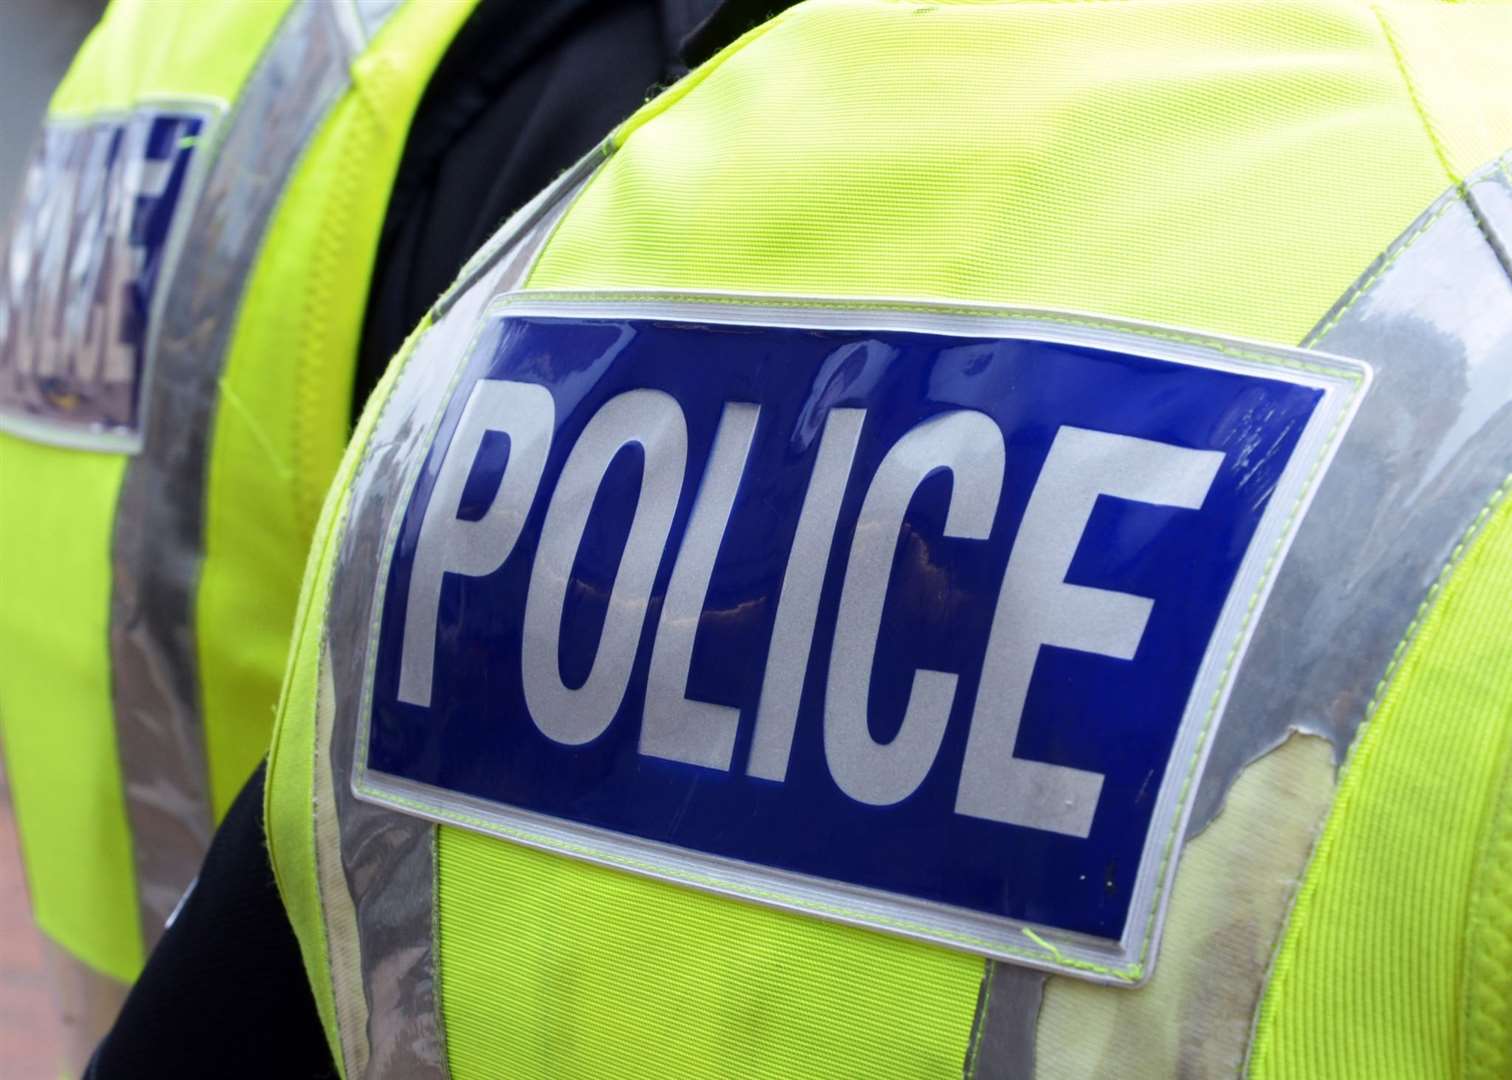 Police have charged a man with road traffic offences after a crash on the A835.